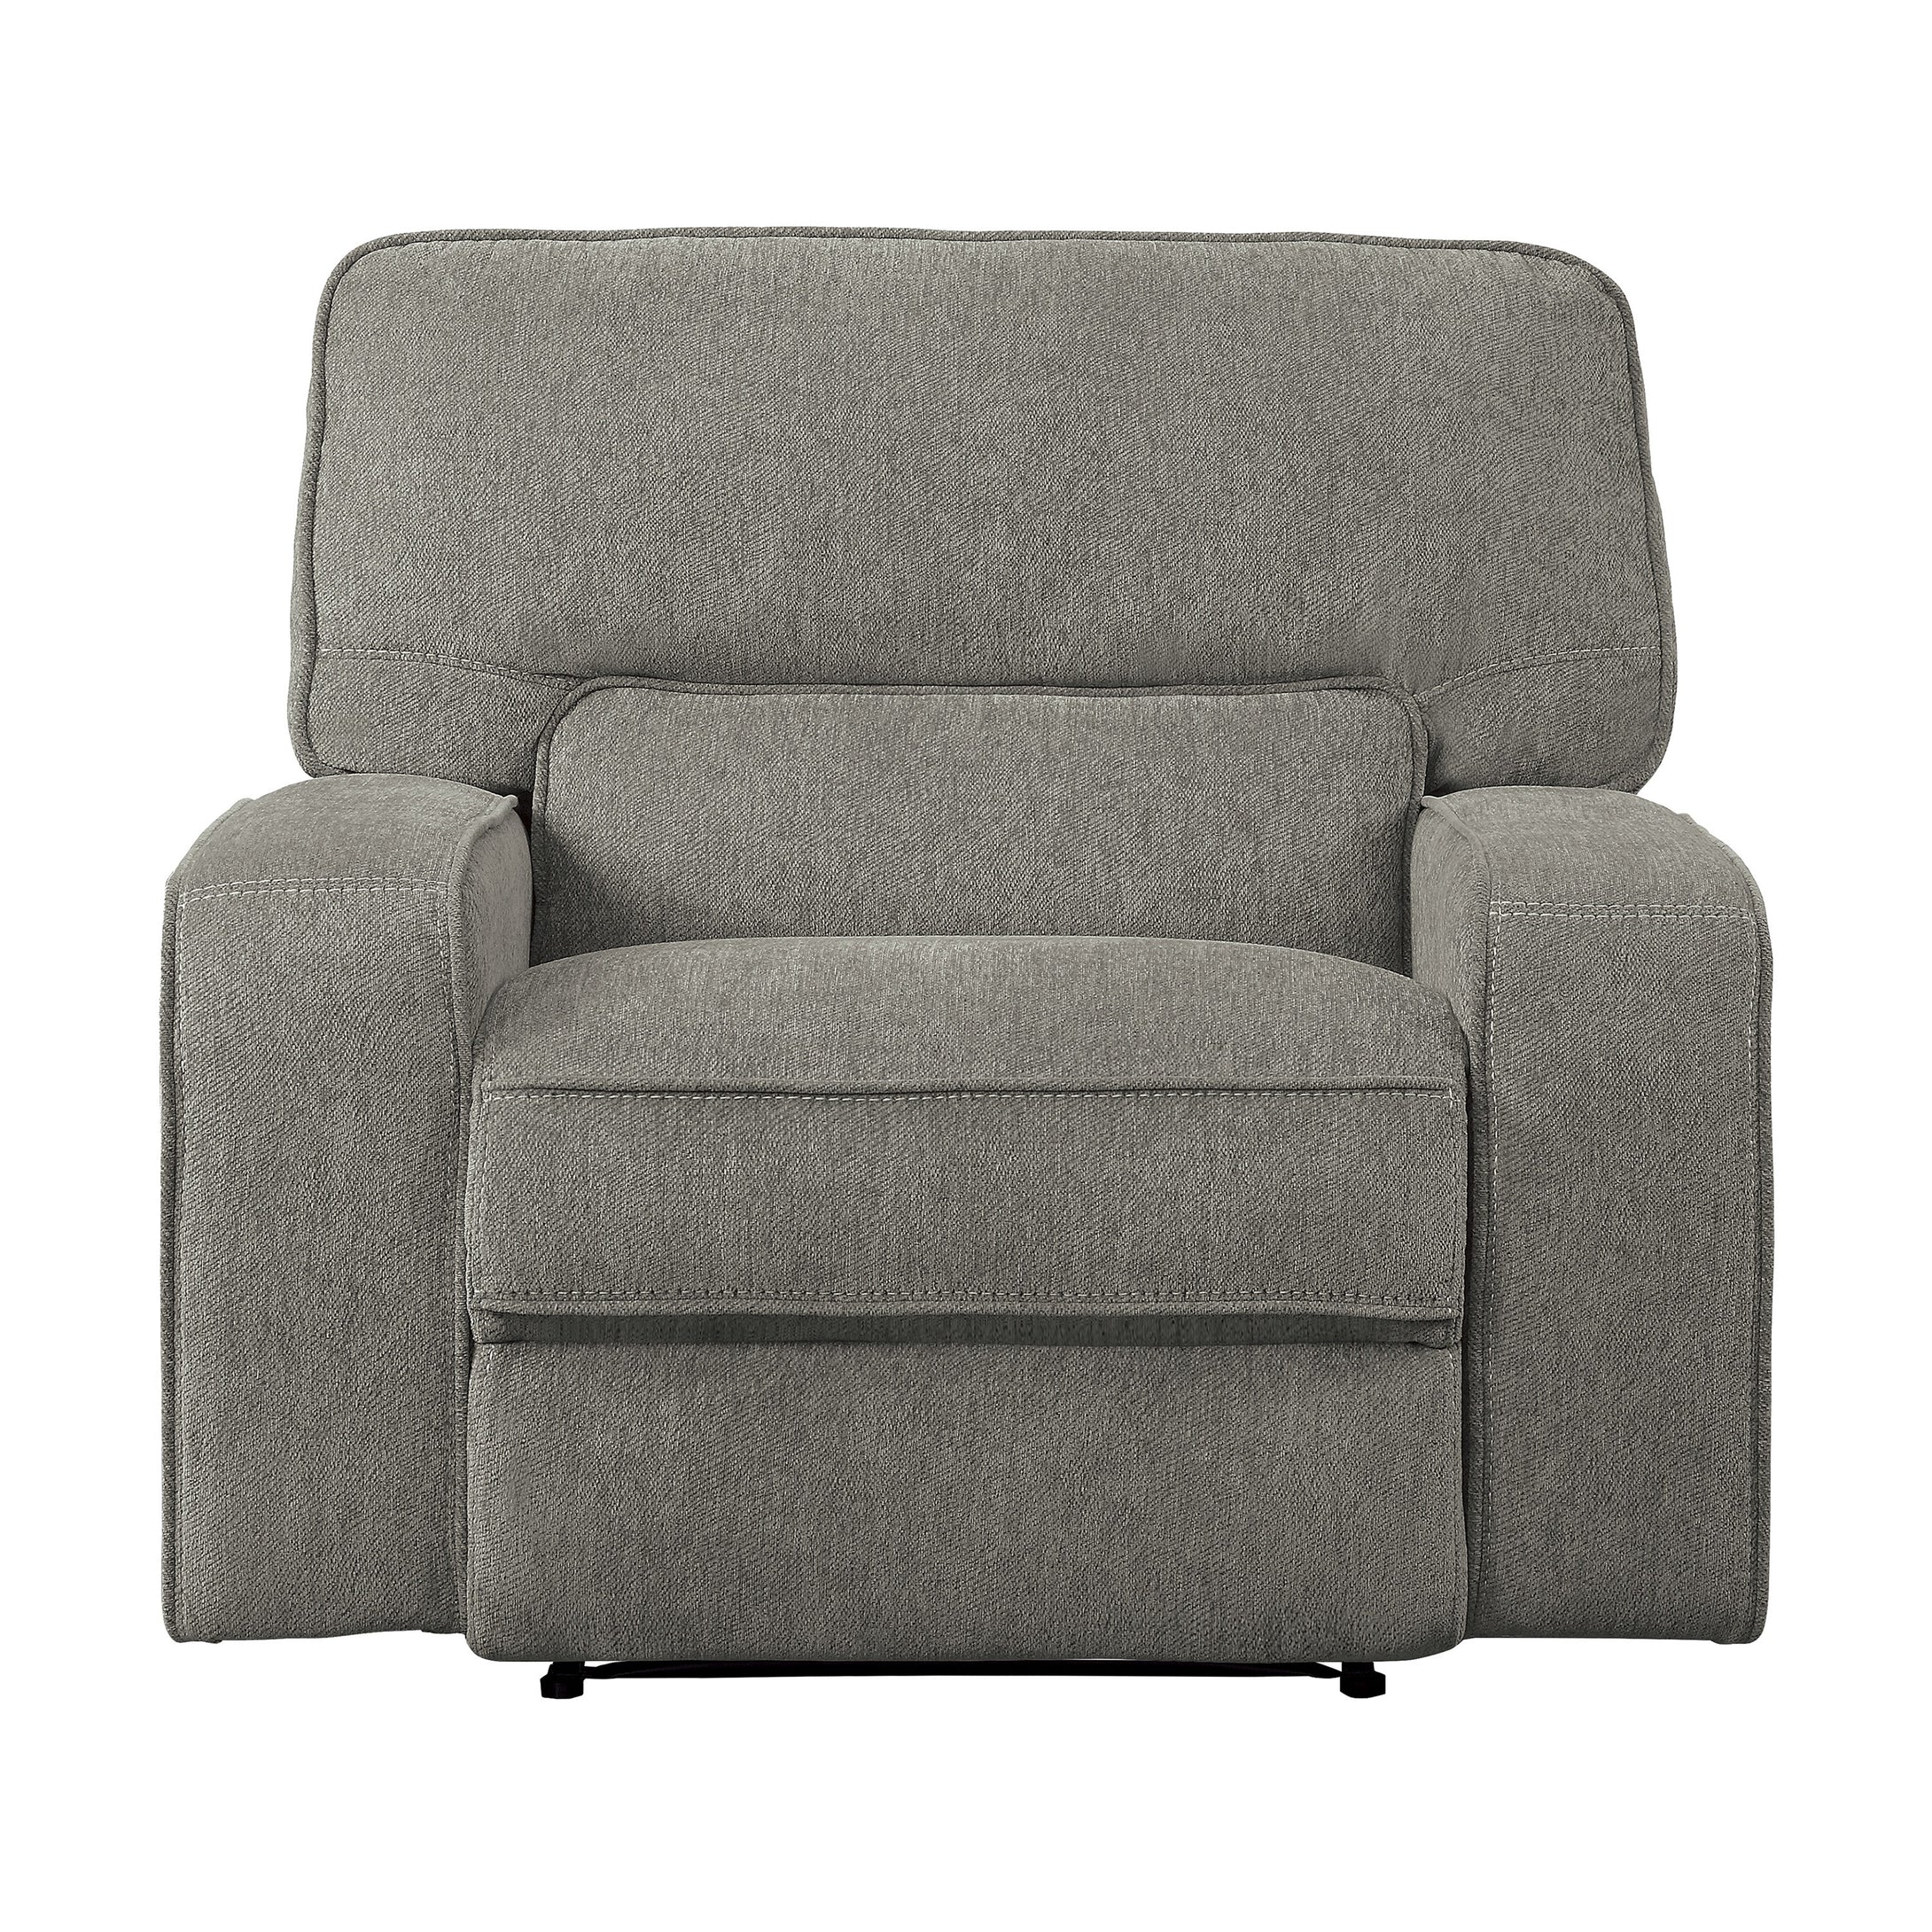 9849MC-1PWH Power Reclining Chair with Power Headrest and USB Port